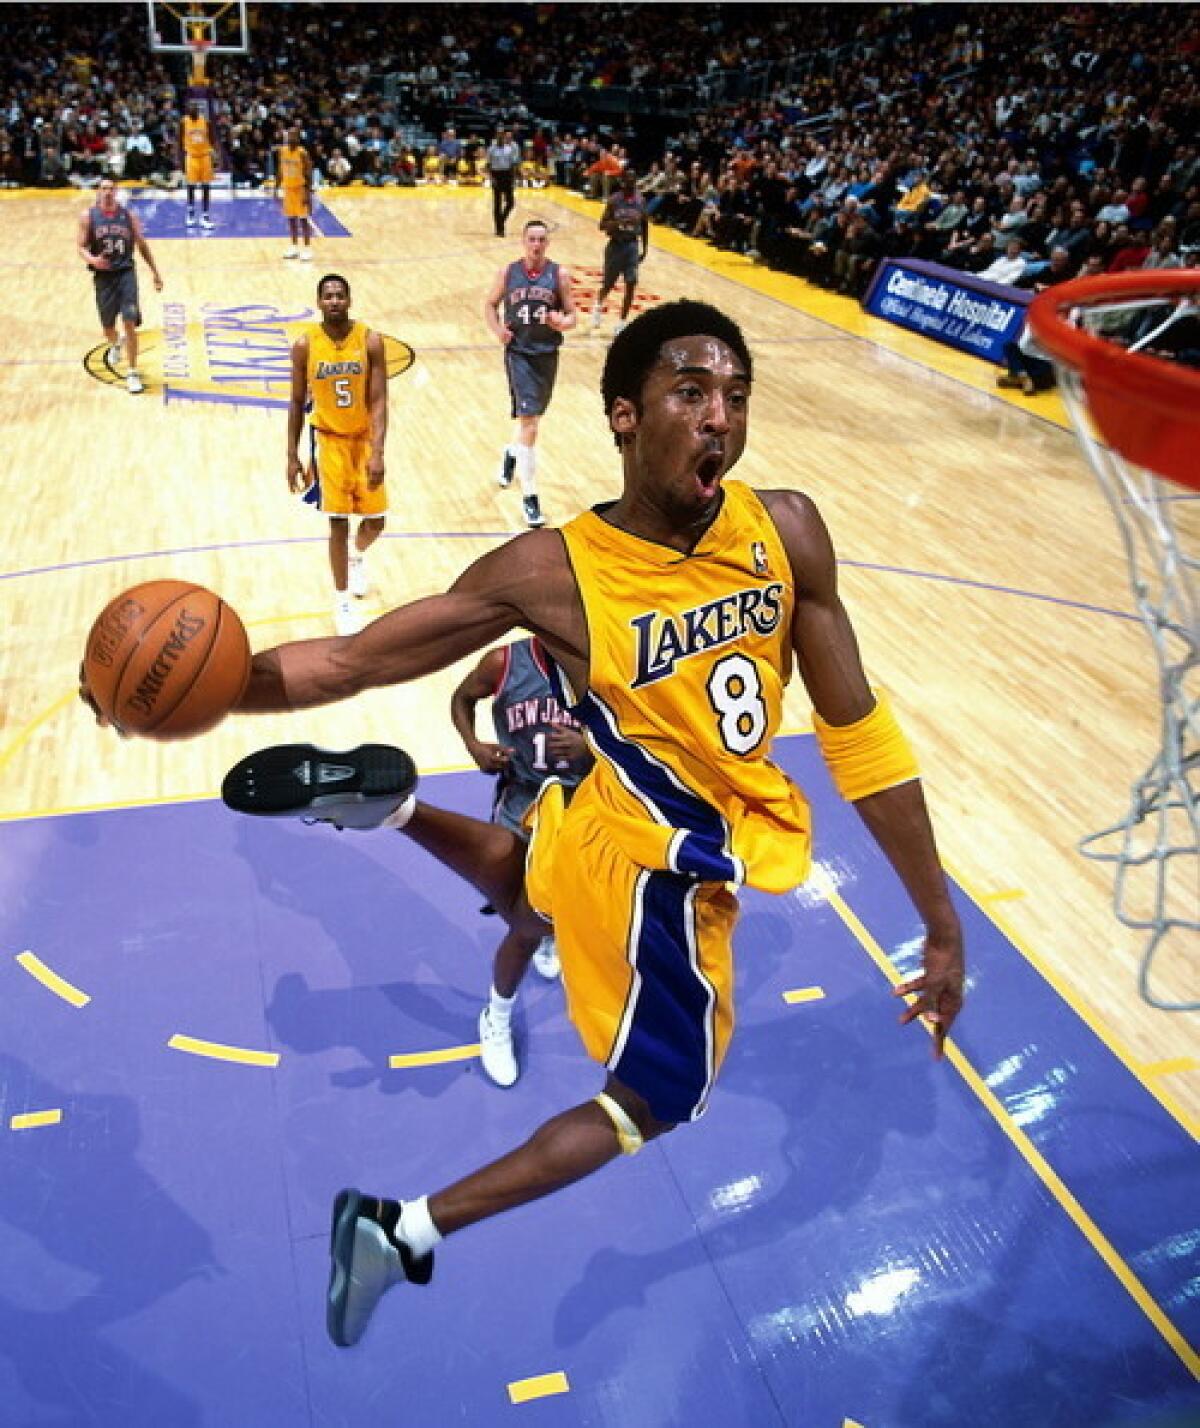 Kobe Bryant goes in for a slam dunk against the Nets during a 2001 NBA game.